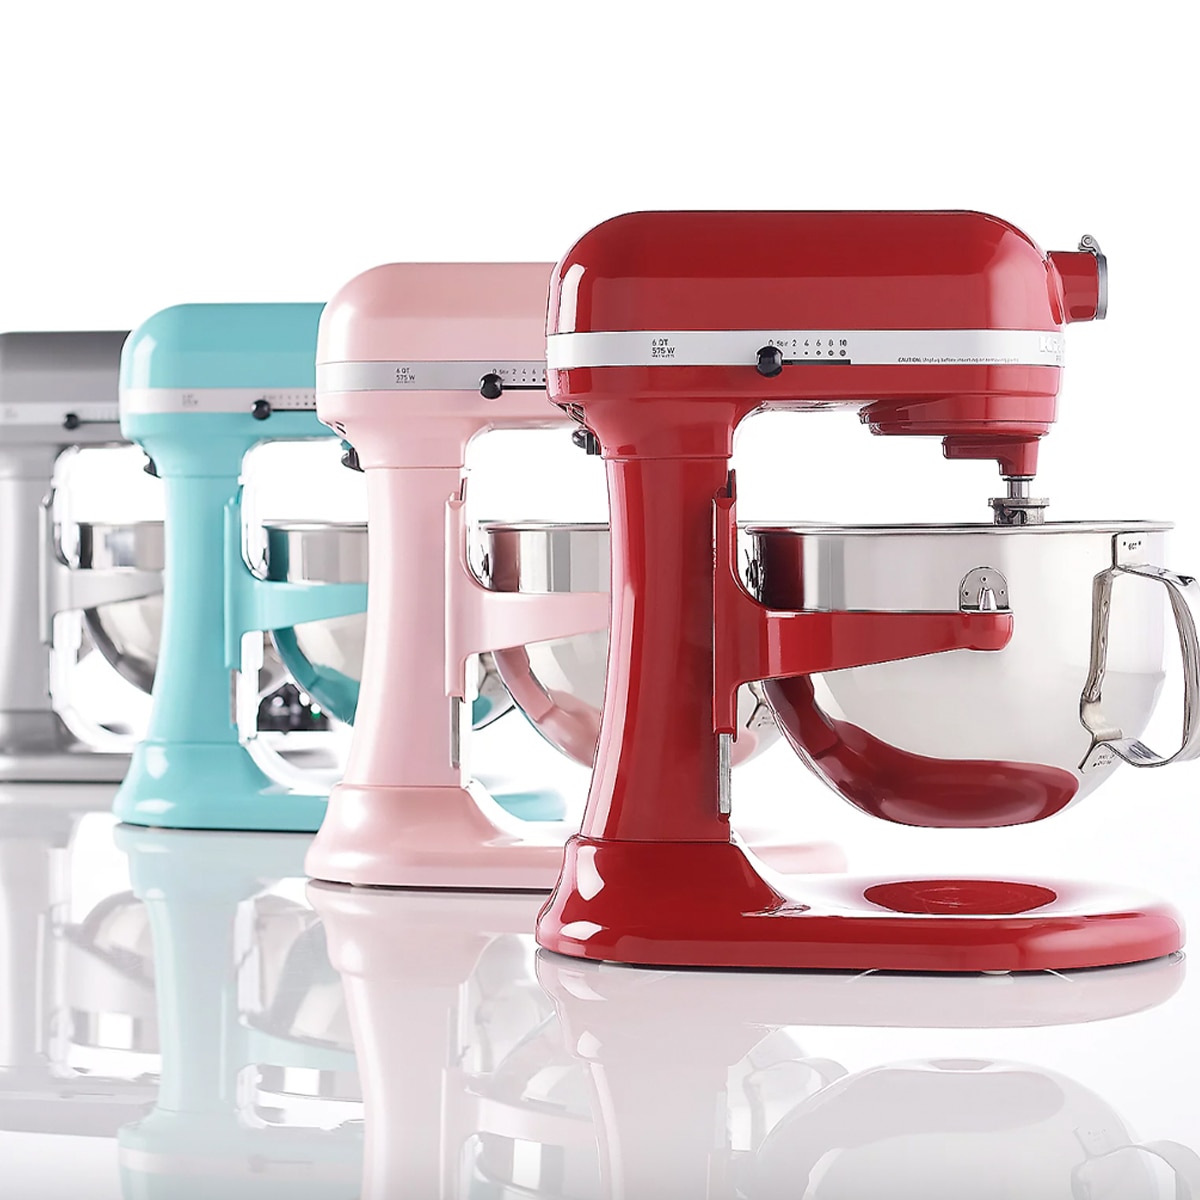 KitchenAid stand mixer deal: This iconic appliance is on sale for